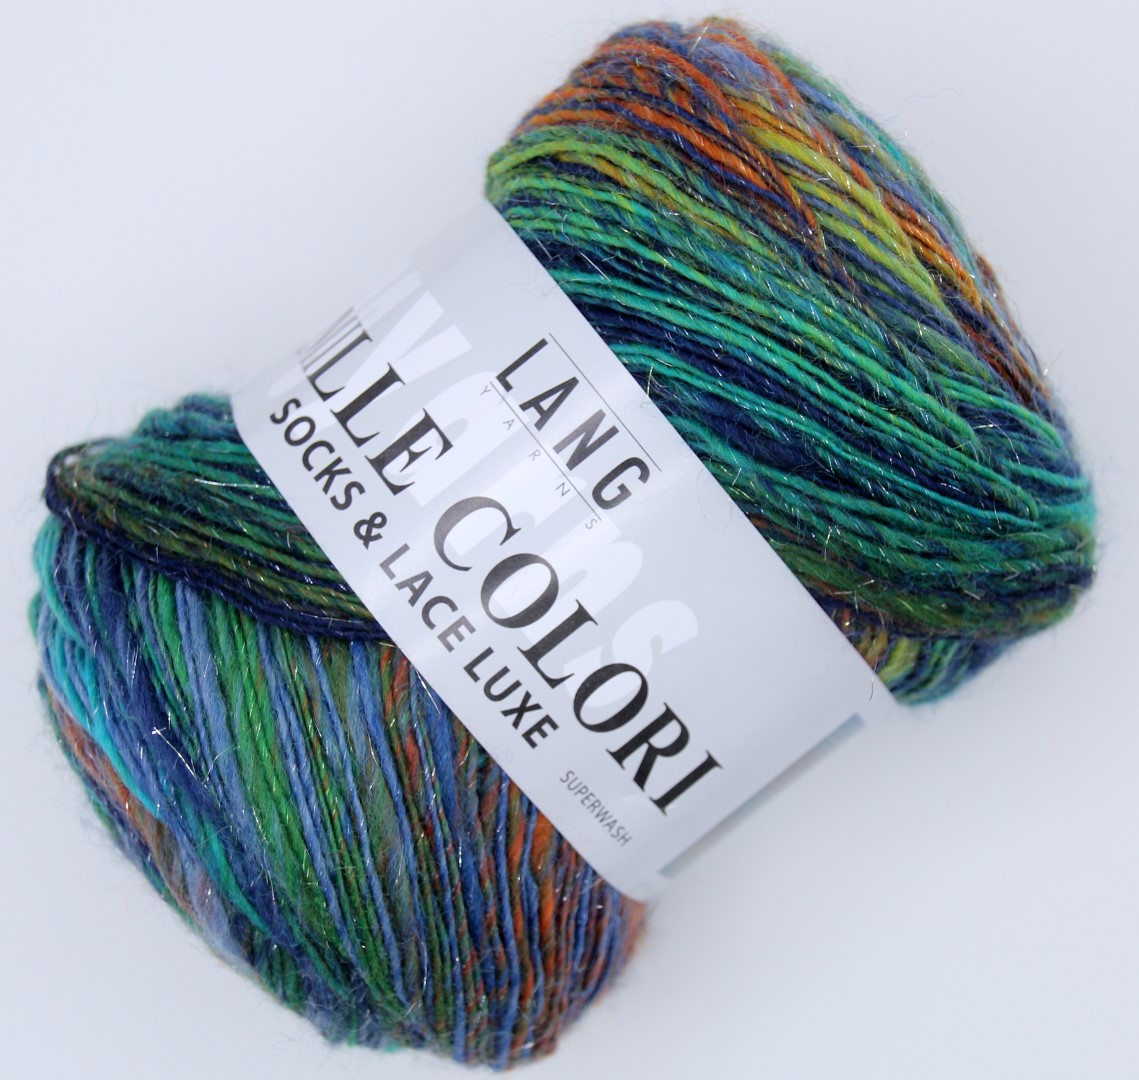 MILLE COLORI SOCKS AND LACE LUXE COLORIS 152 (1) (Large)